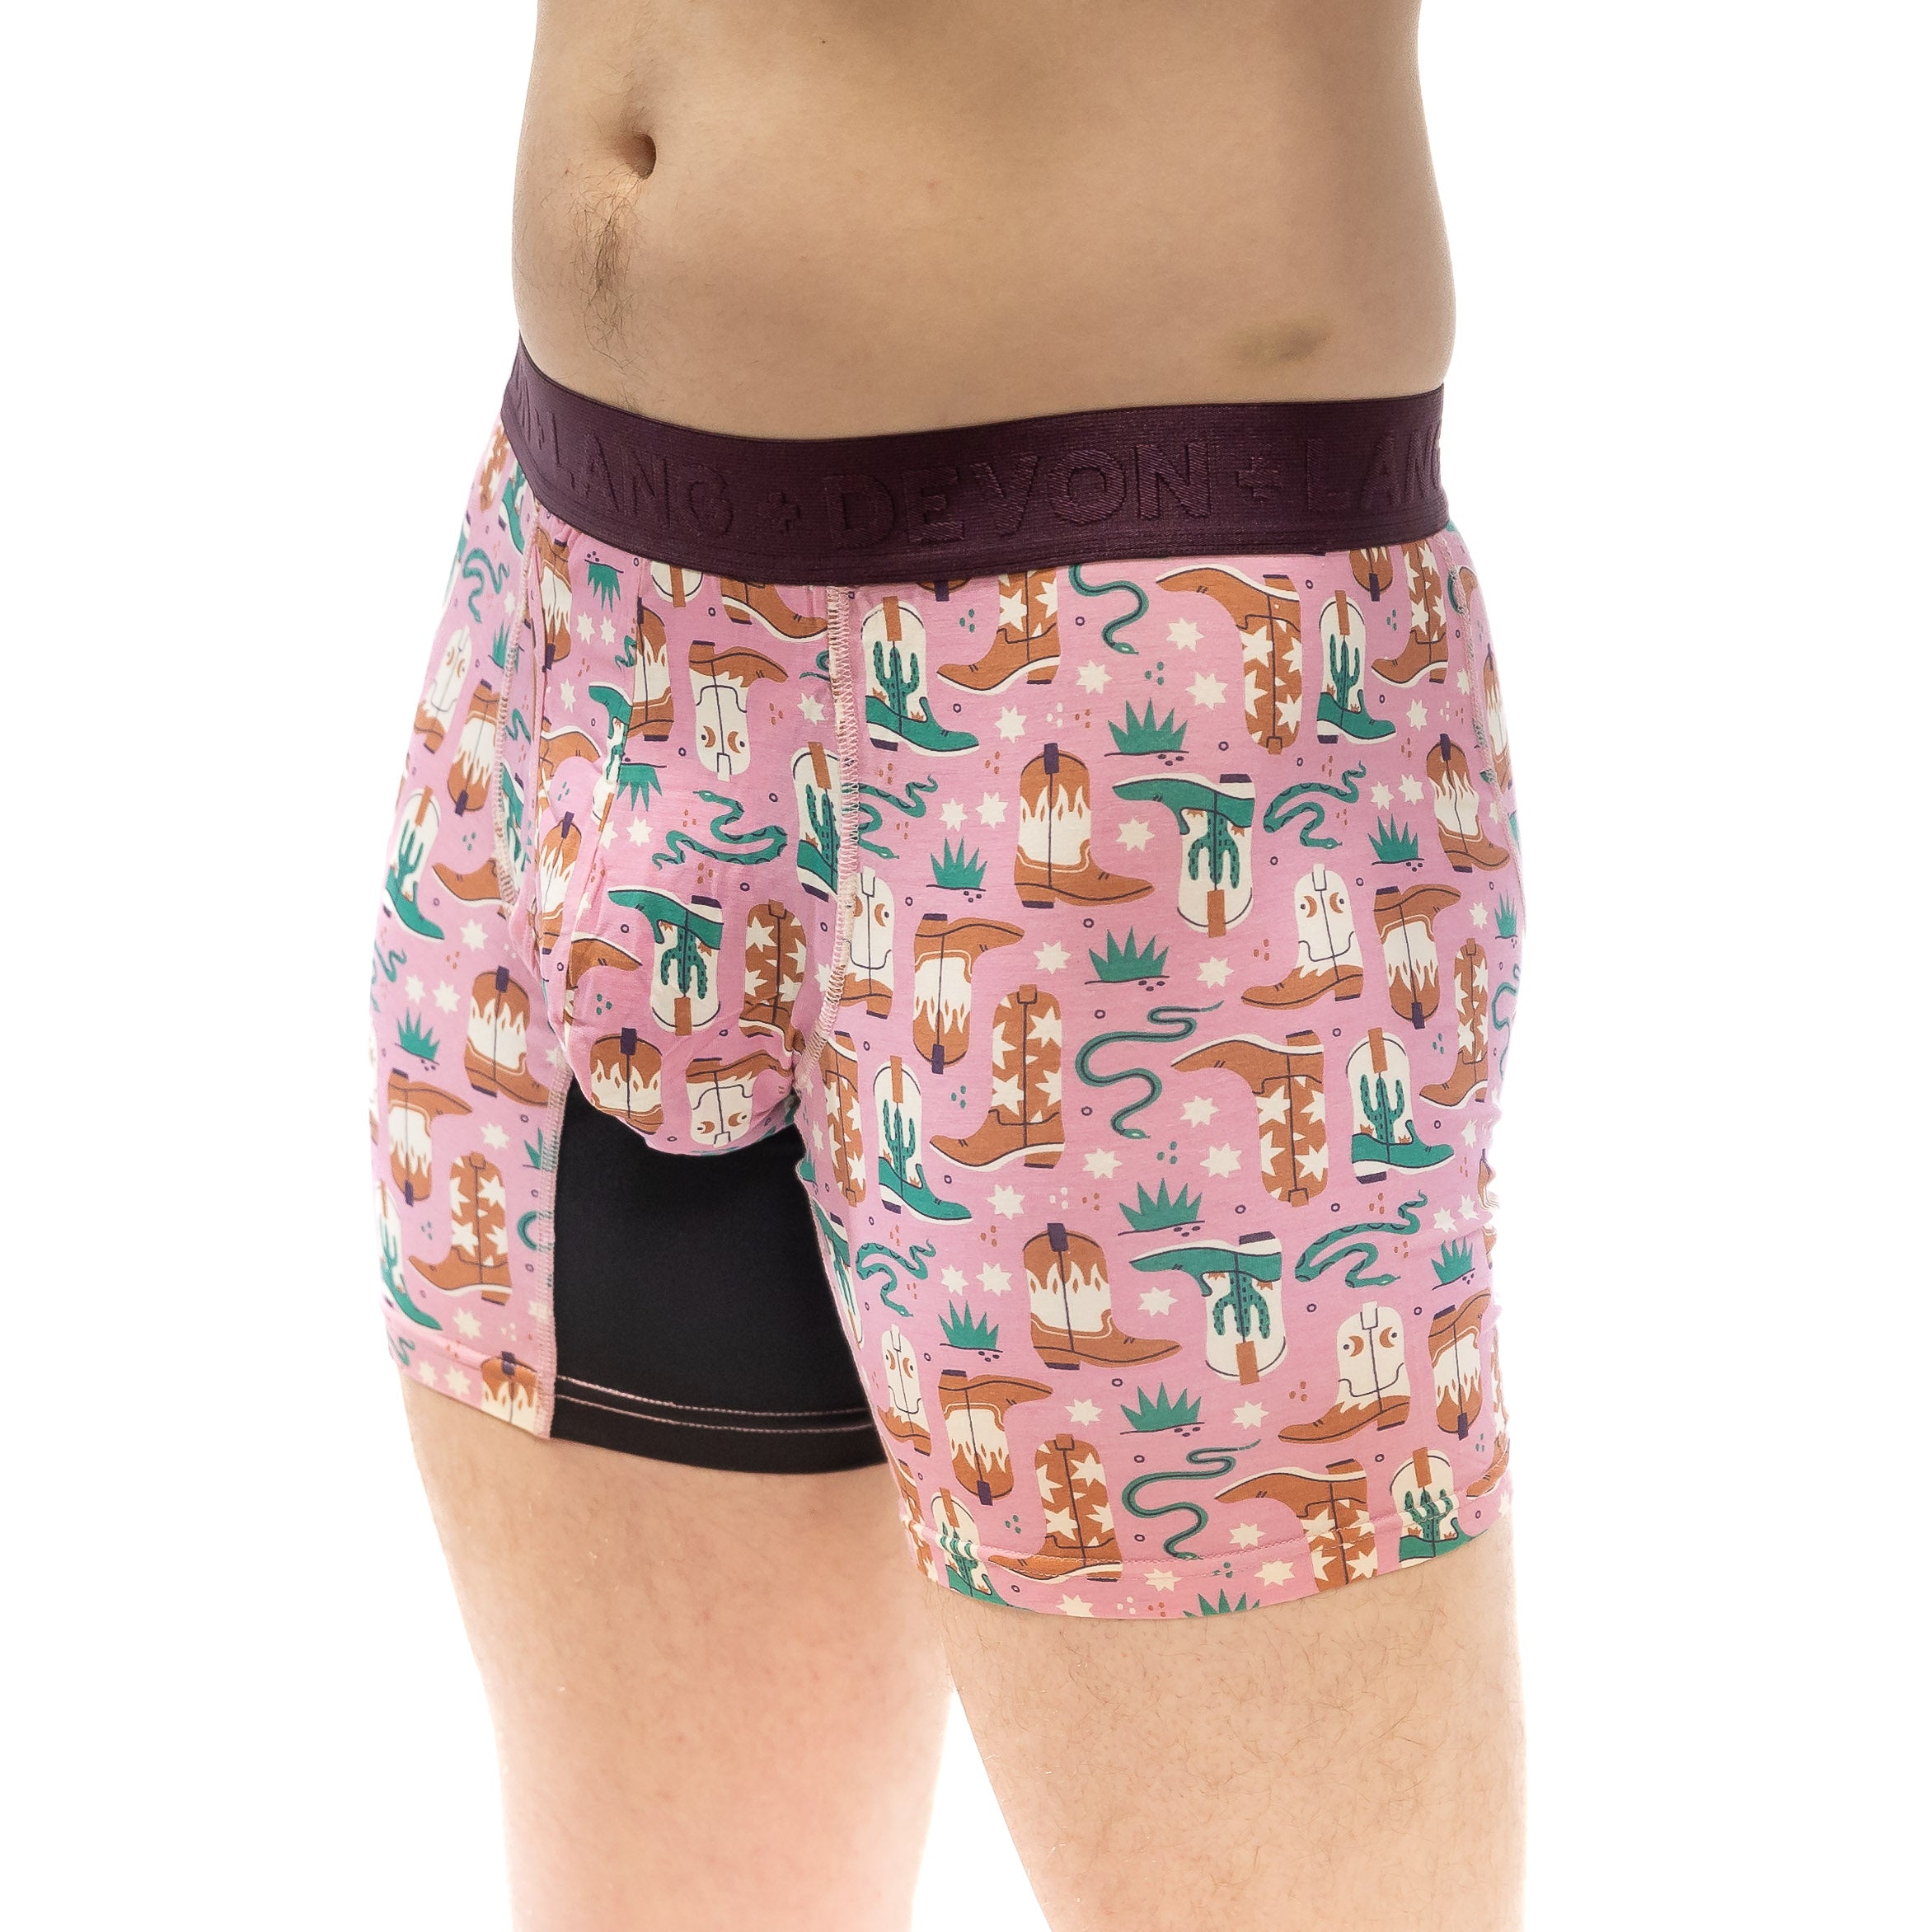 Journey Boxer Brief - Multi-Packs - Berry/Cowboy Ducks/Snakes + Boots